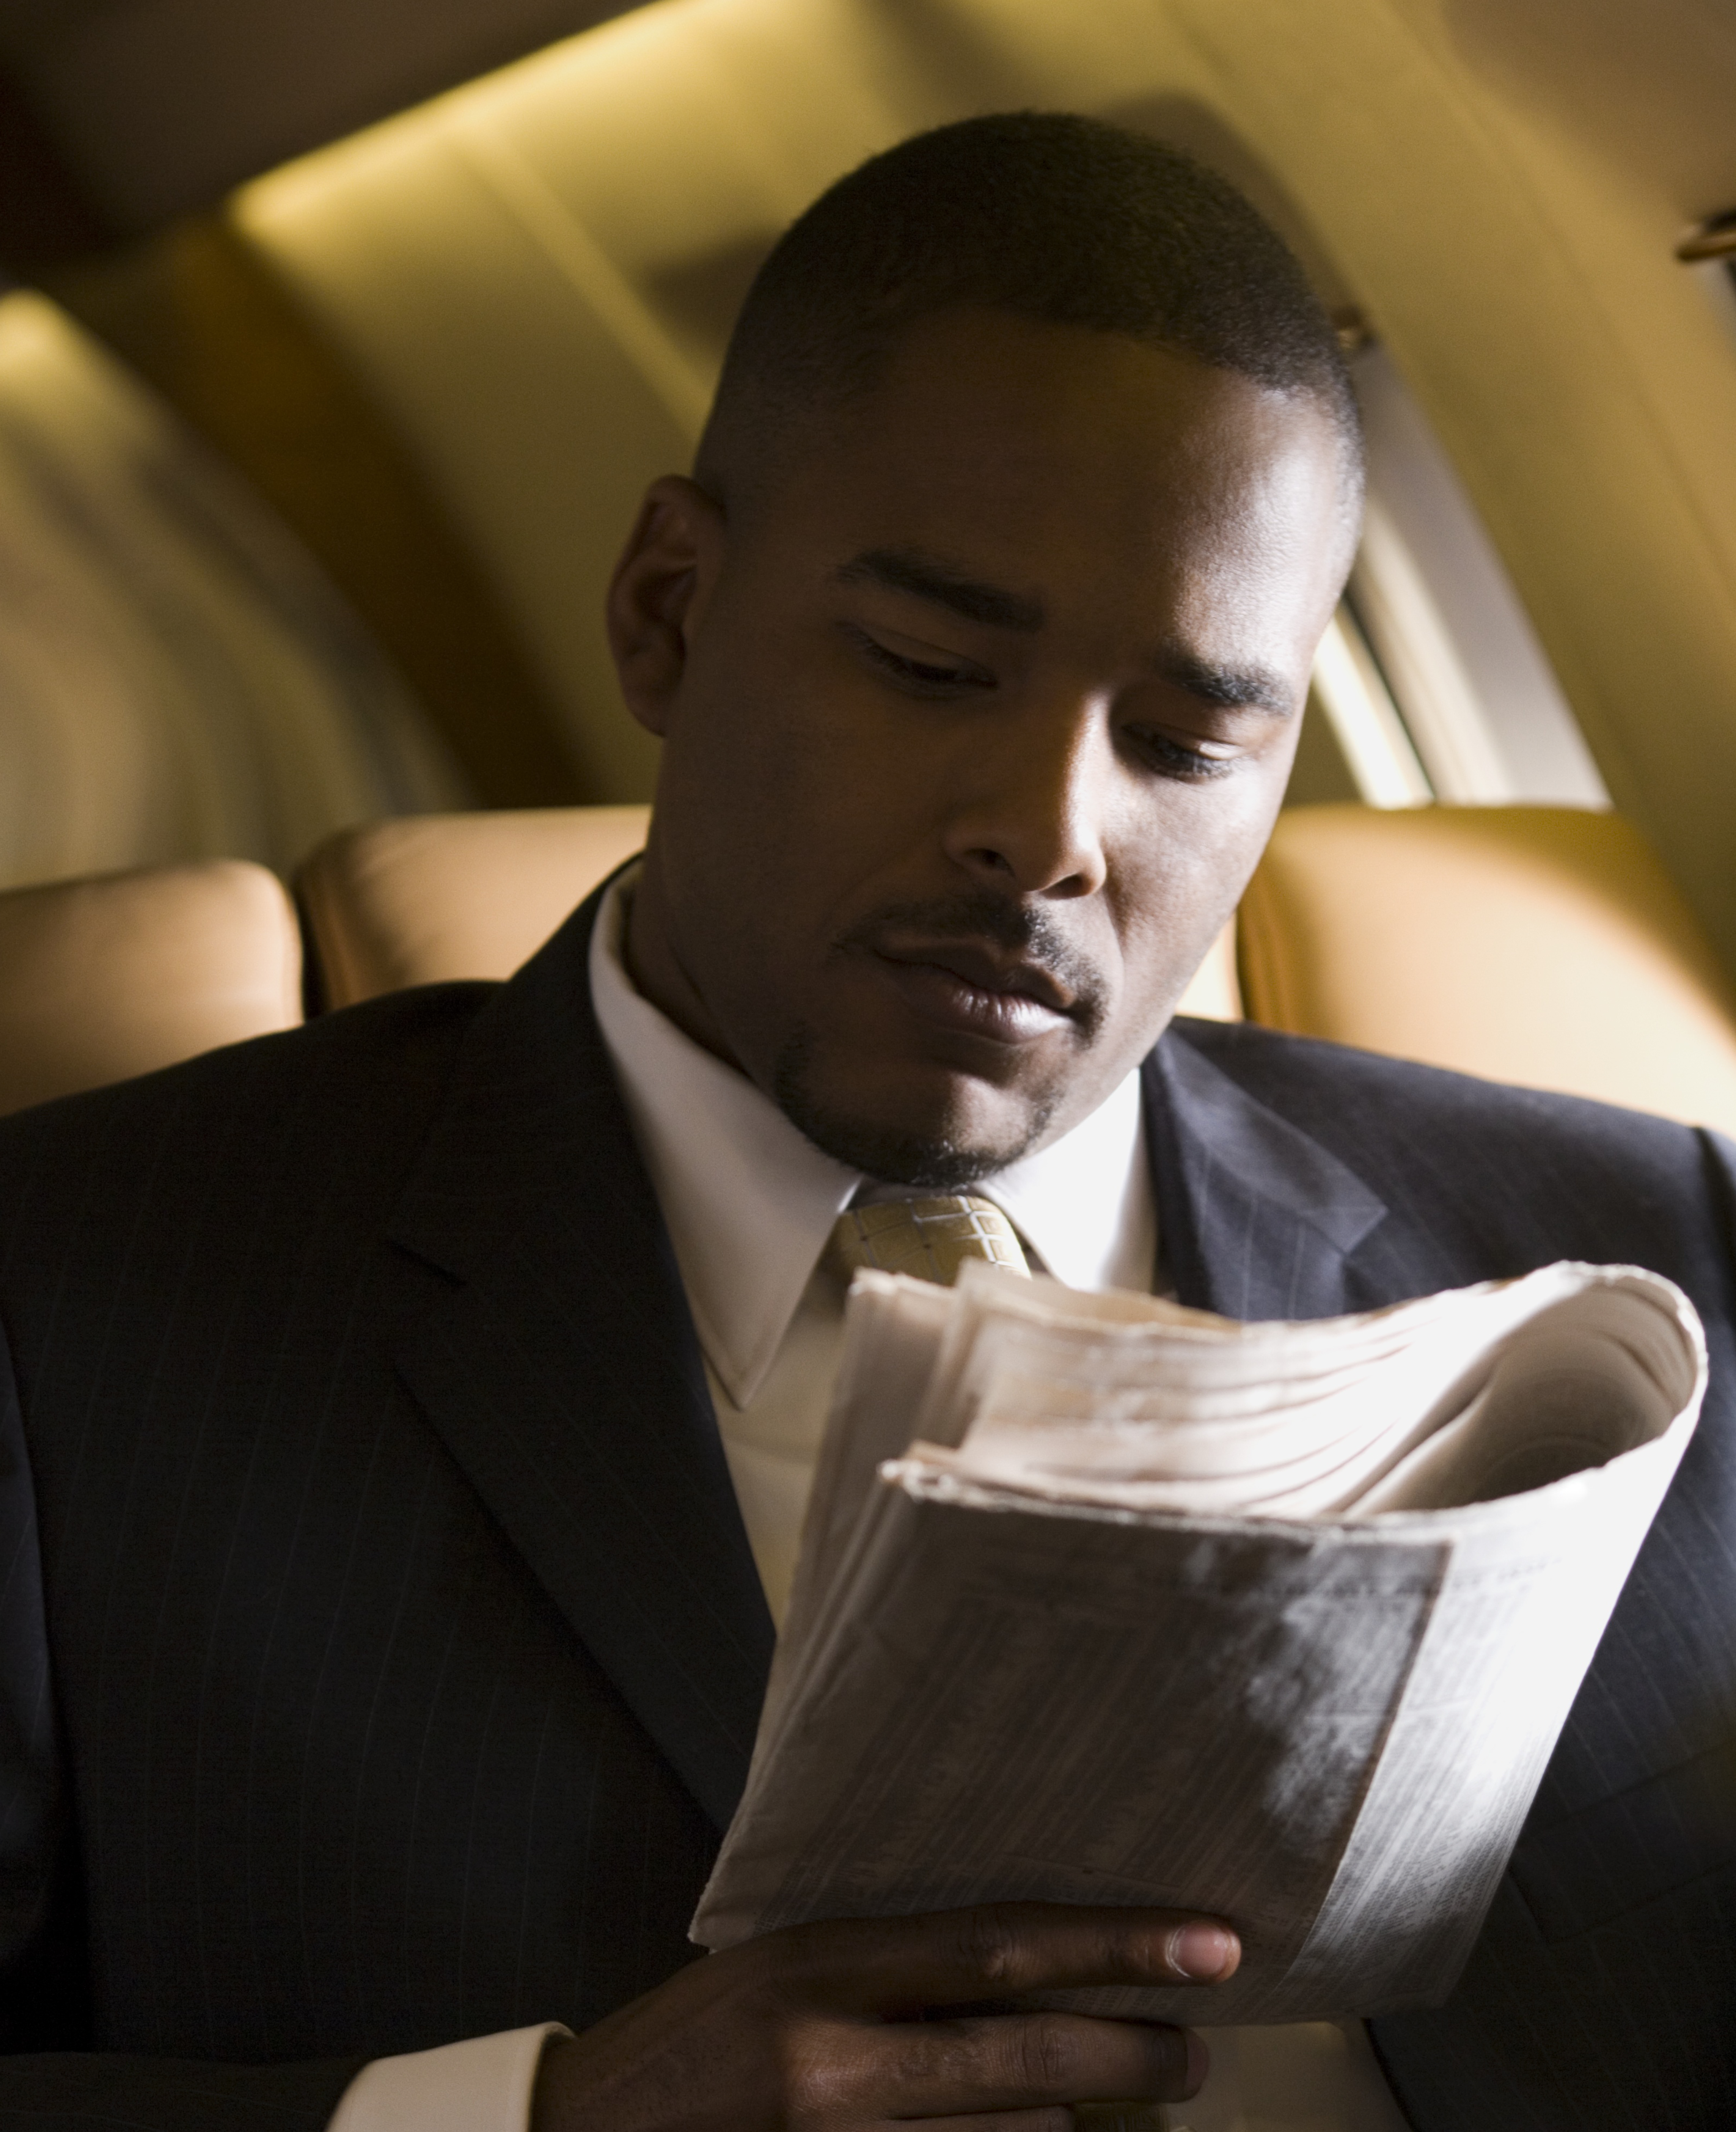 Business man reading a newspaper on an airplane